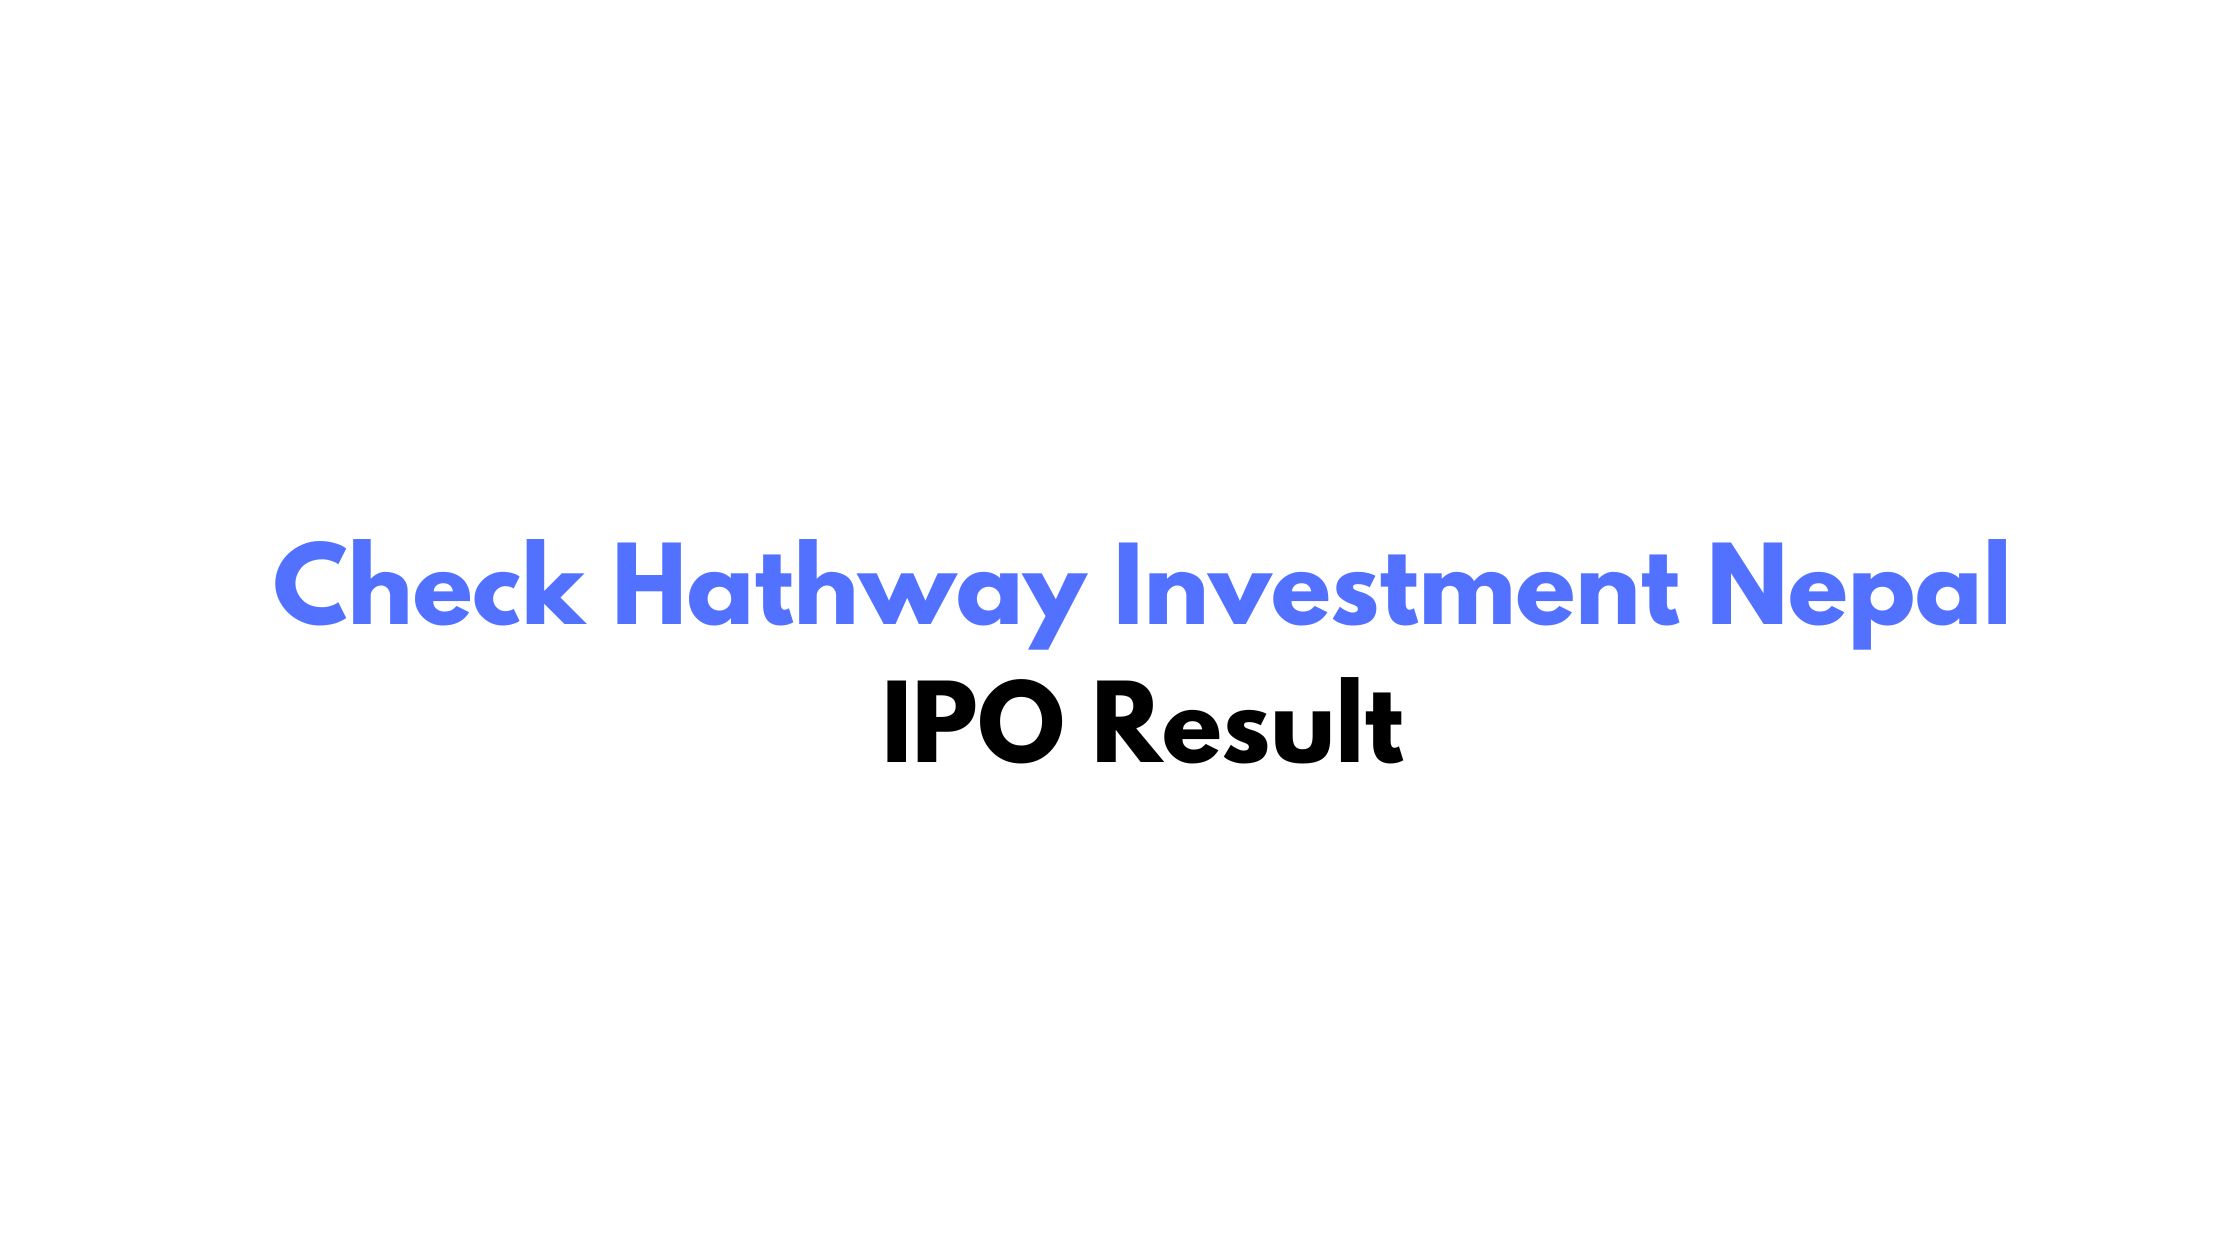 Check Hathway Investment Nepal IPO Result (Meroshare, CDSC, Global IME Capital Limited)